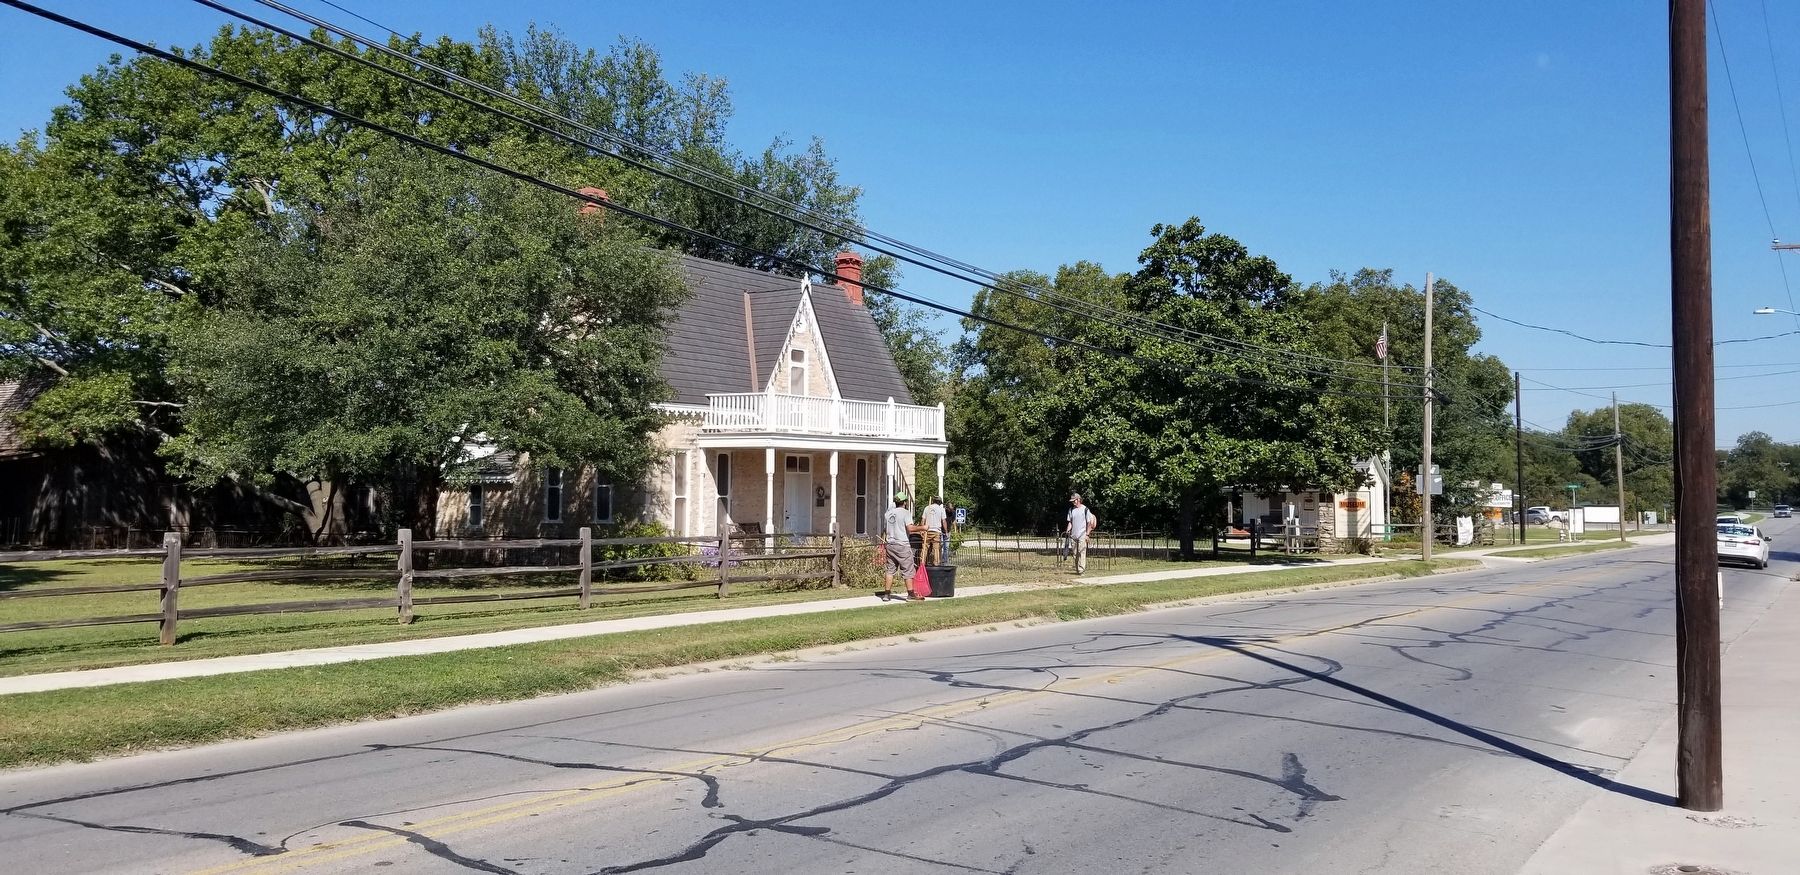 The view of the Oldest Home in Stephenville from the street image. Click for full size.